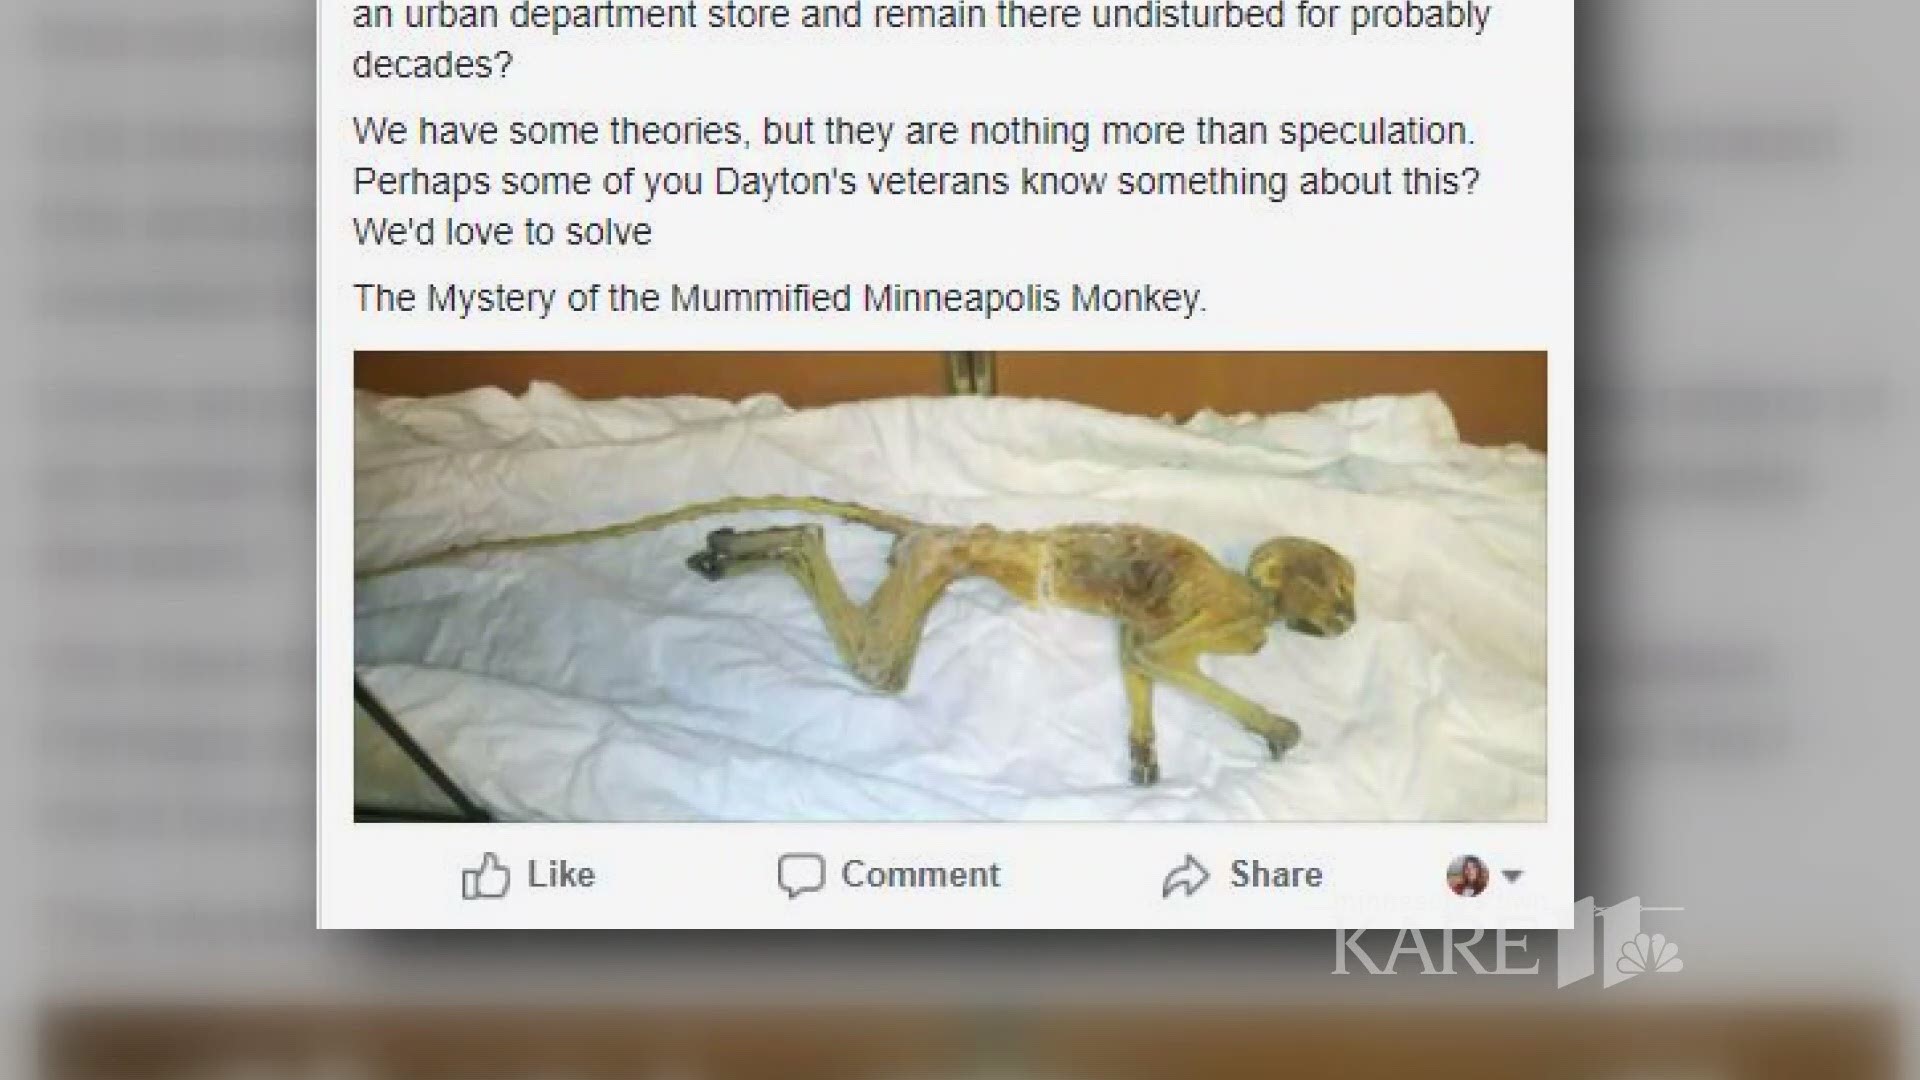 Workers renovating the old Dayton's department store in downtown Minneapolis have discovered a mystery: the mummified remains of a monkey. https://kare11.tv/2HibVae